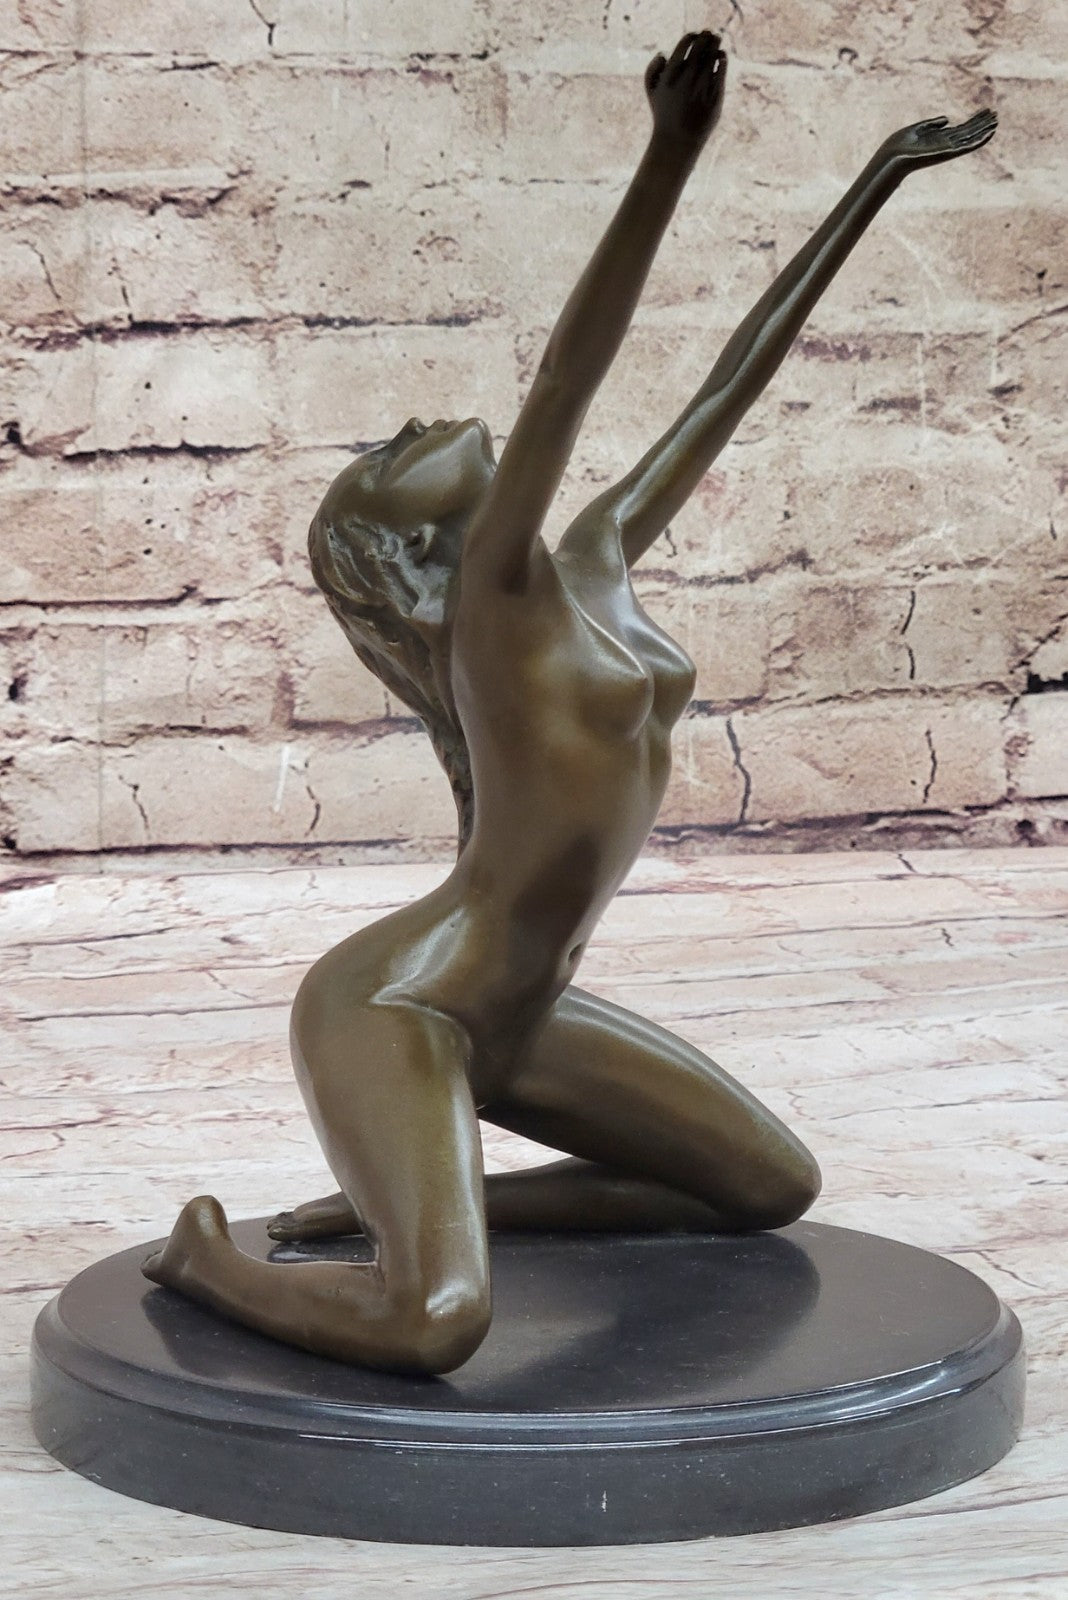 BRONZE NUDE GIRL ON THE BASE FIGURE ABSTRACT MODERN ART STATUE.SIGNED: Nick ART